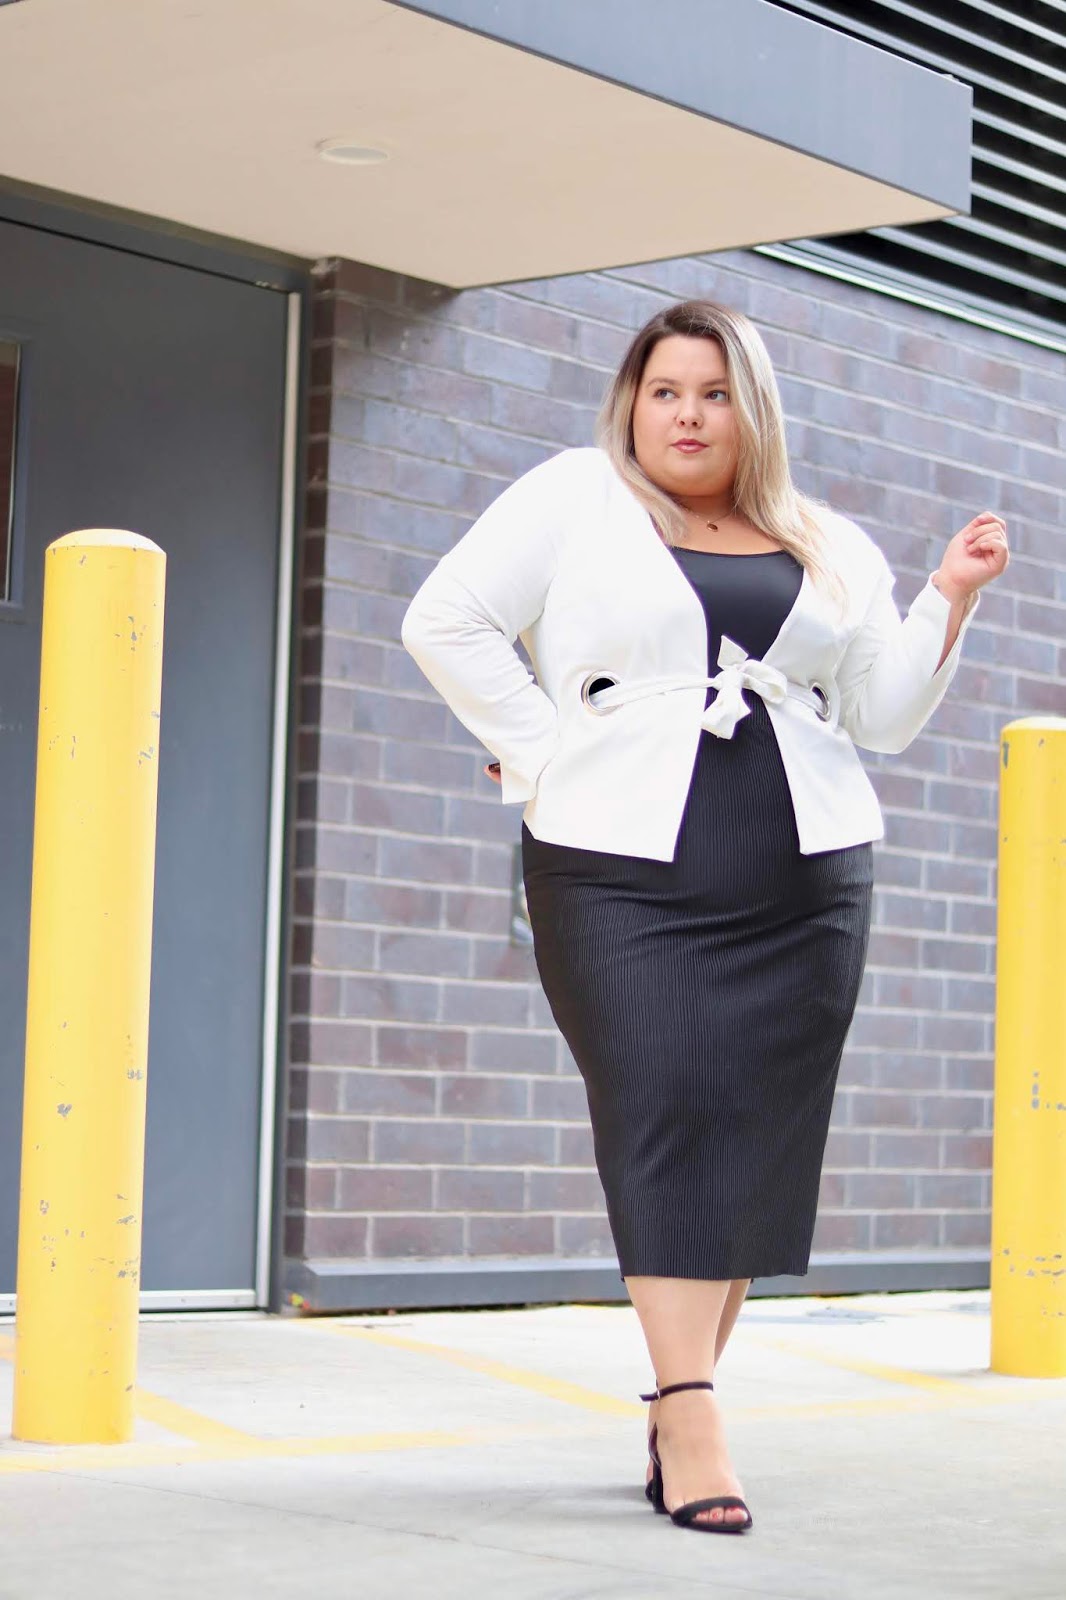 How to dress professionally when you are plus size